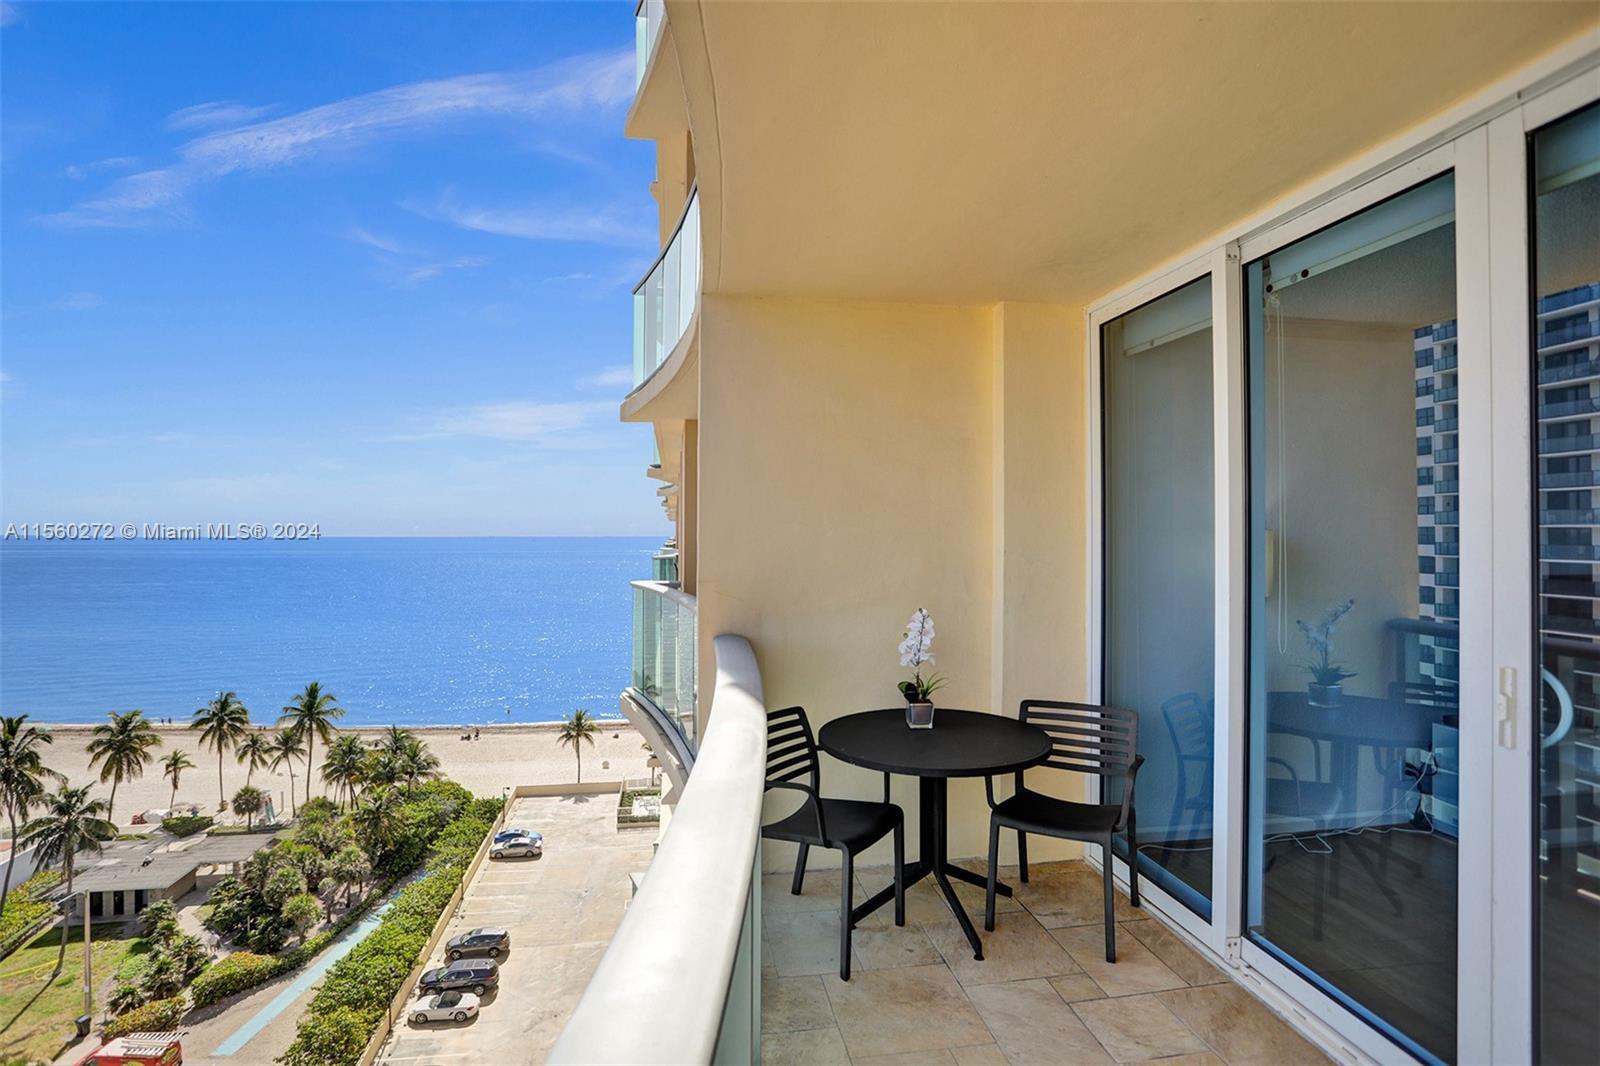 Photo of 2501 S Ocean Dr #1238 (Available June 22) in Hollywood, FL